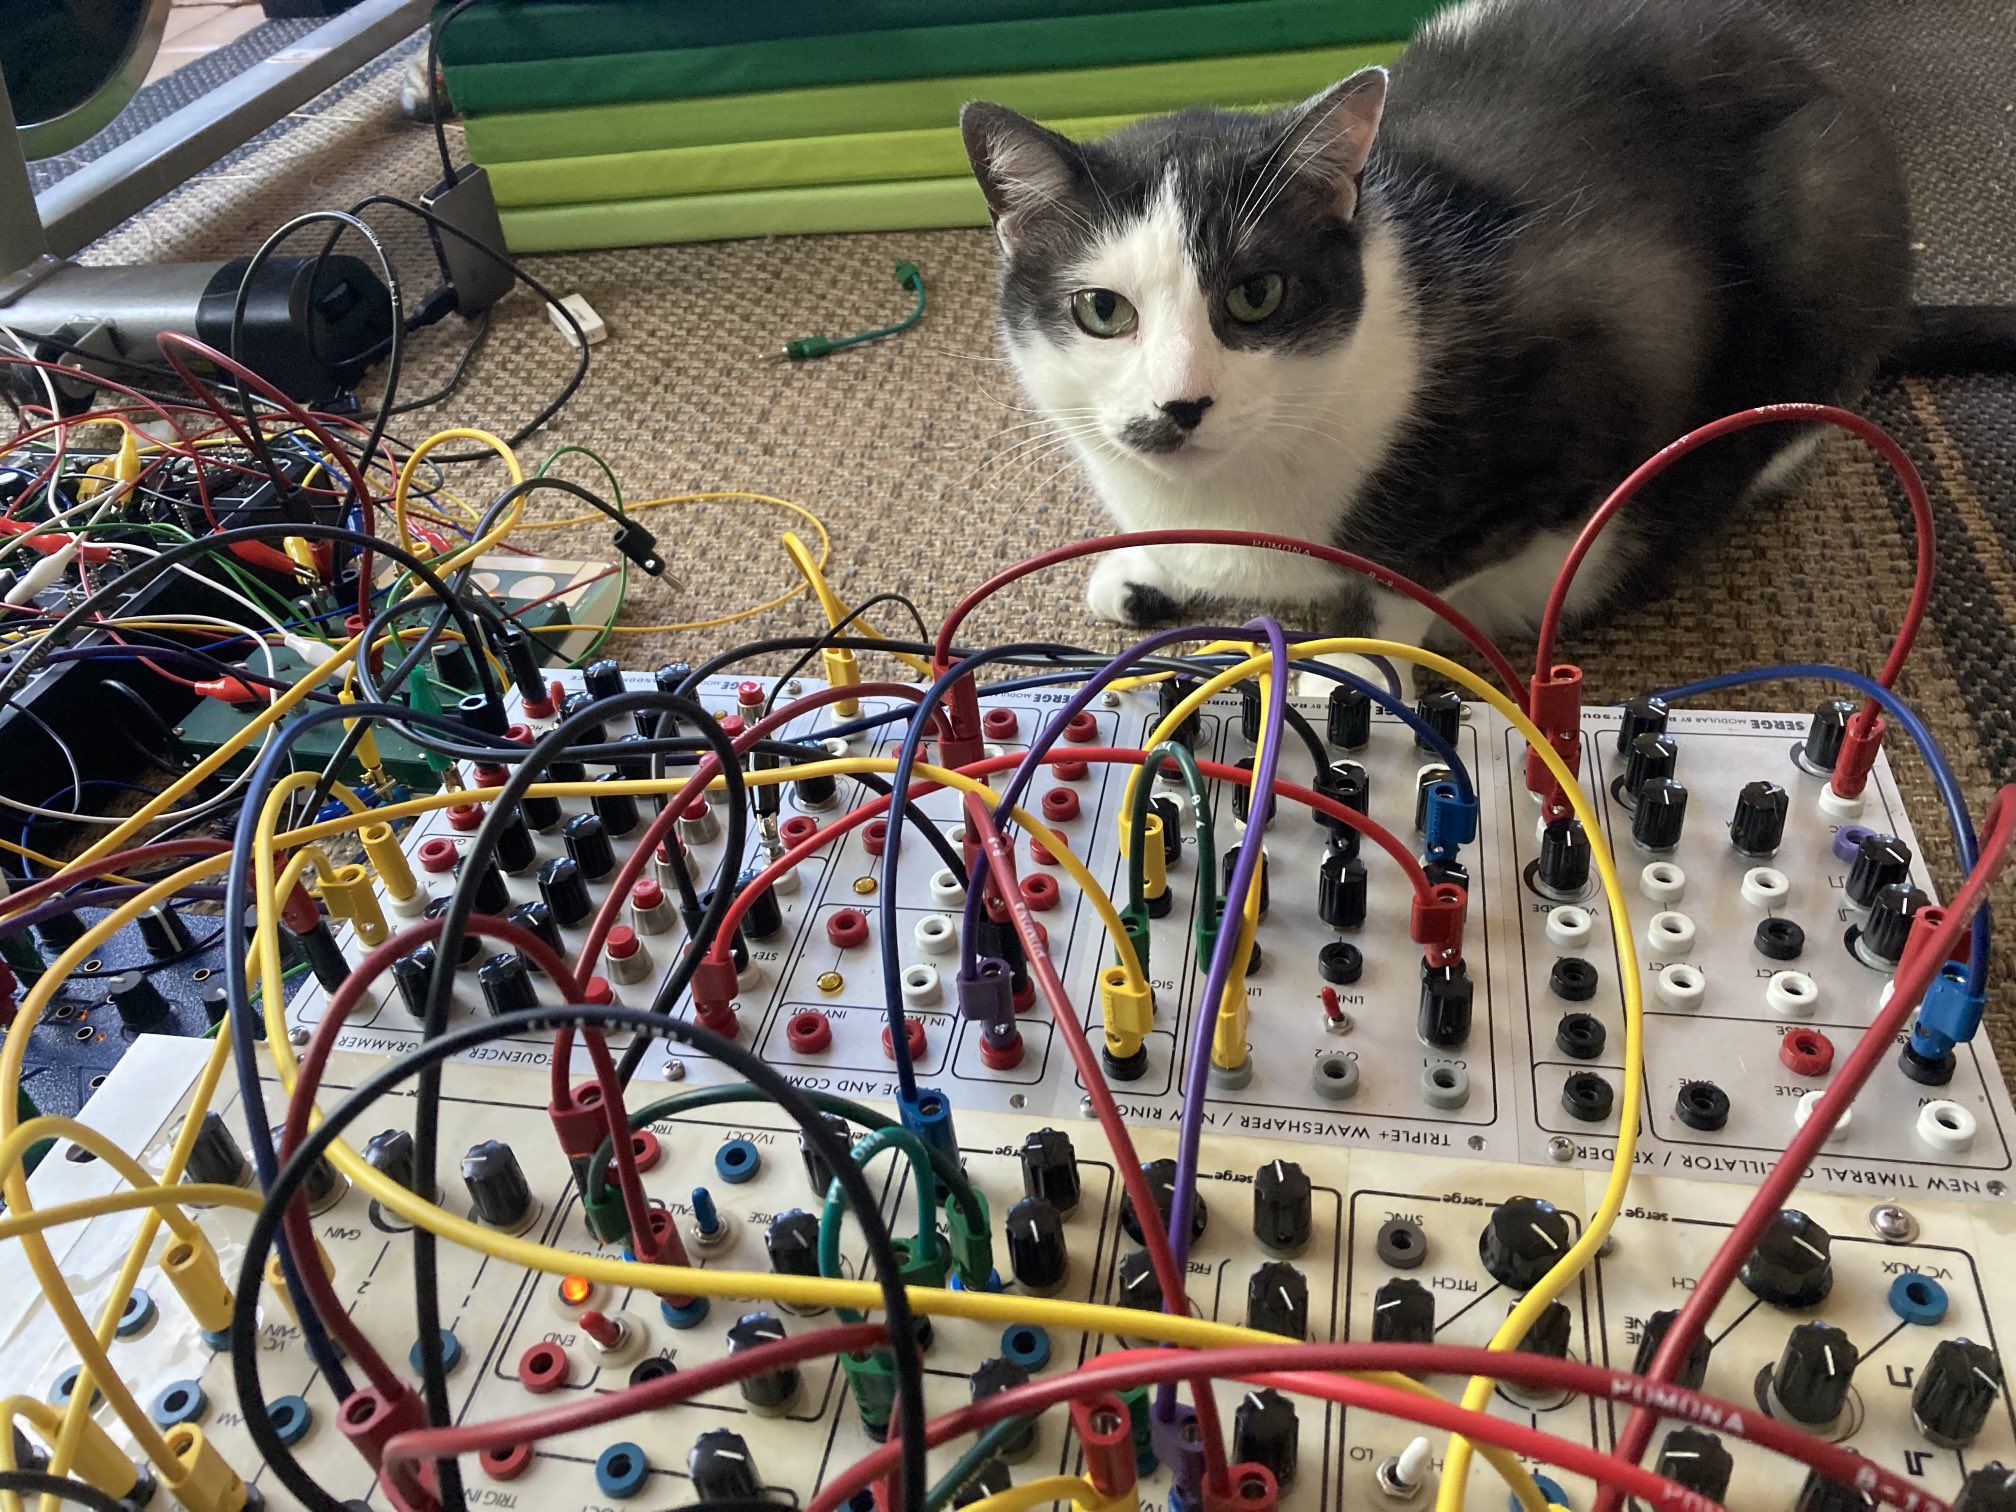 Orion the gray tuxedo cat sits behind a Eurorack serge modular system with numerous patch cables.